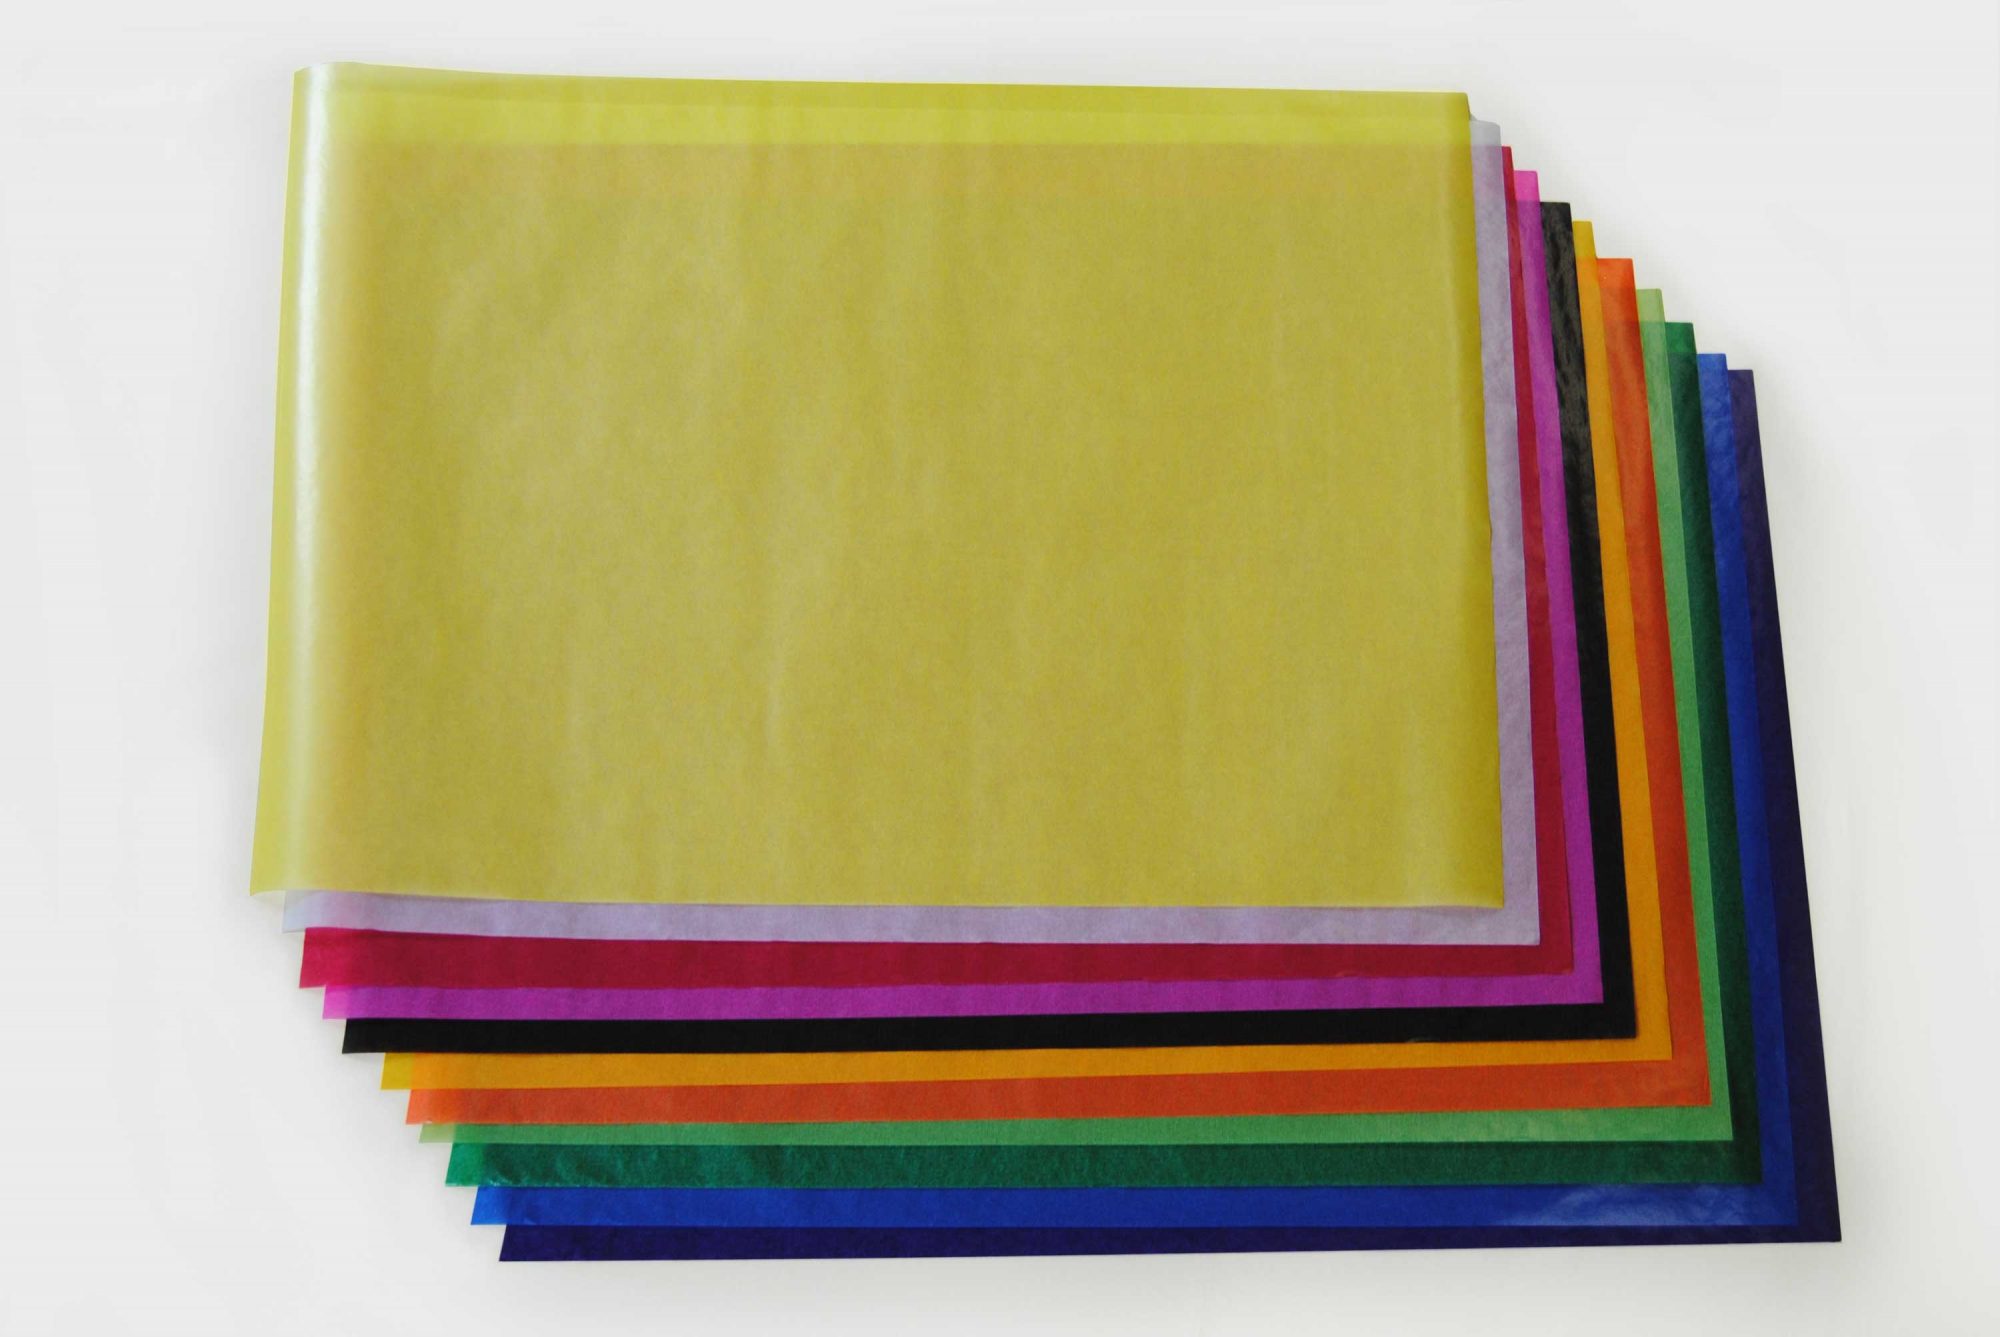 Kite Paper, Assorted Colors, 100 Sheets, 19.5 X 27.5